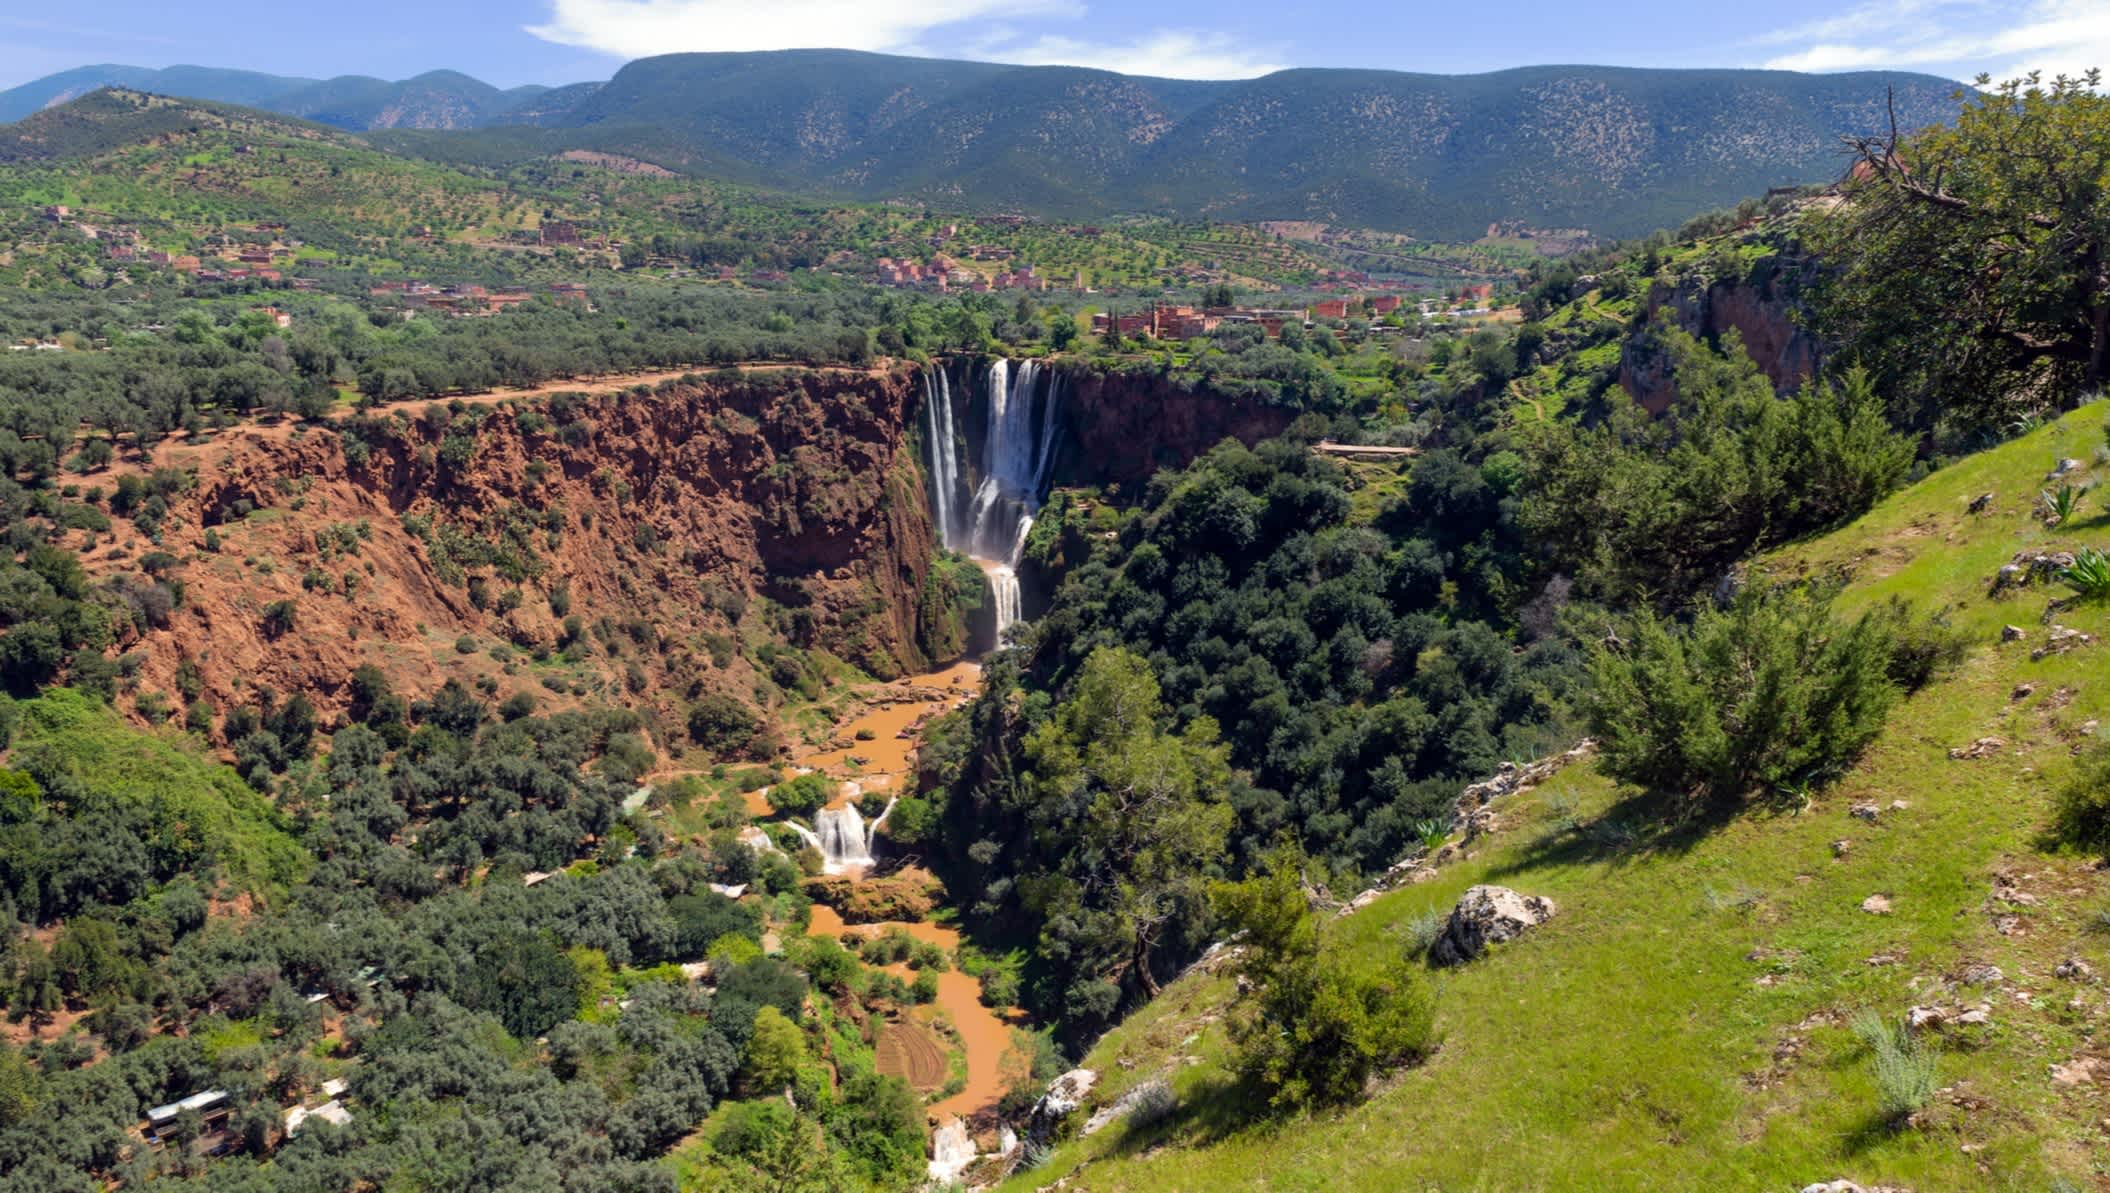 Waterfall in green nature, Morocco